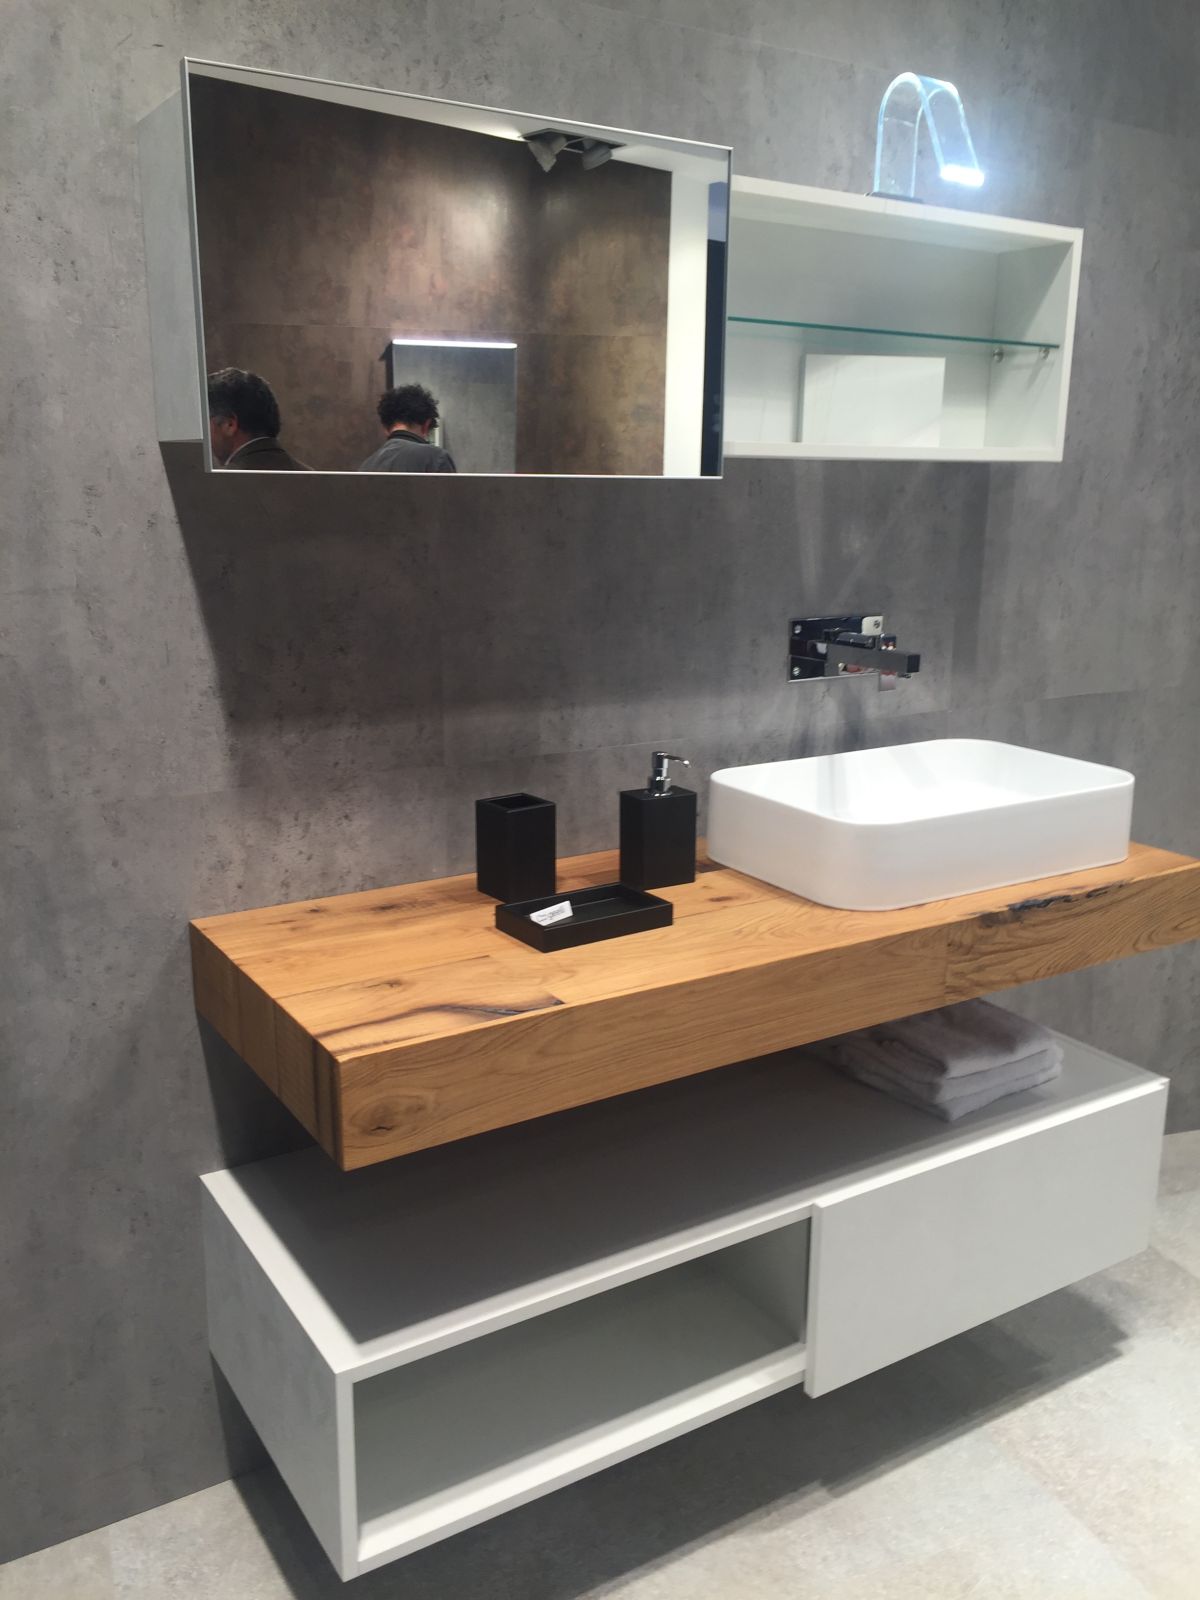 Solid wood floating countertop for bathroom